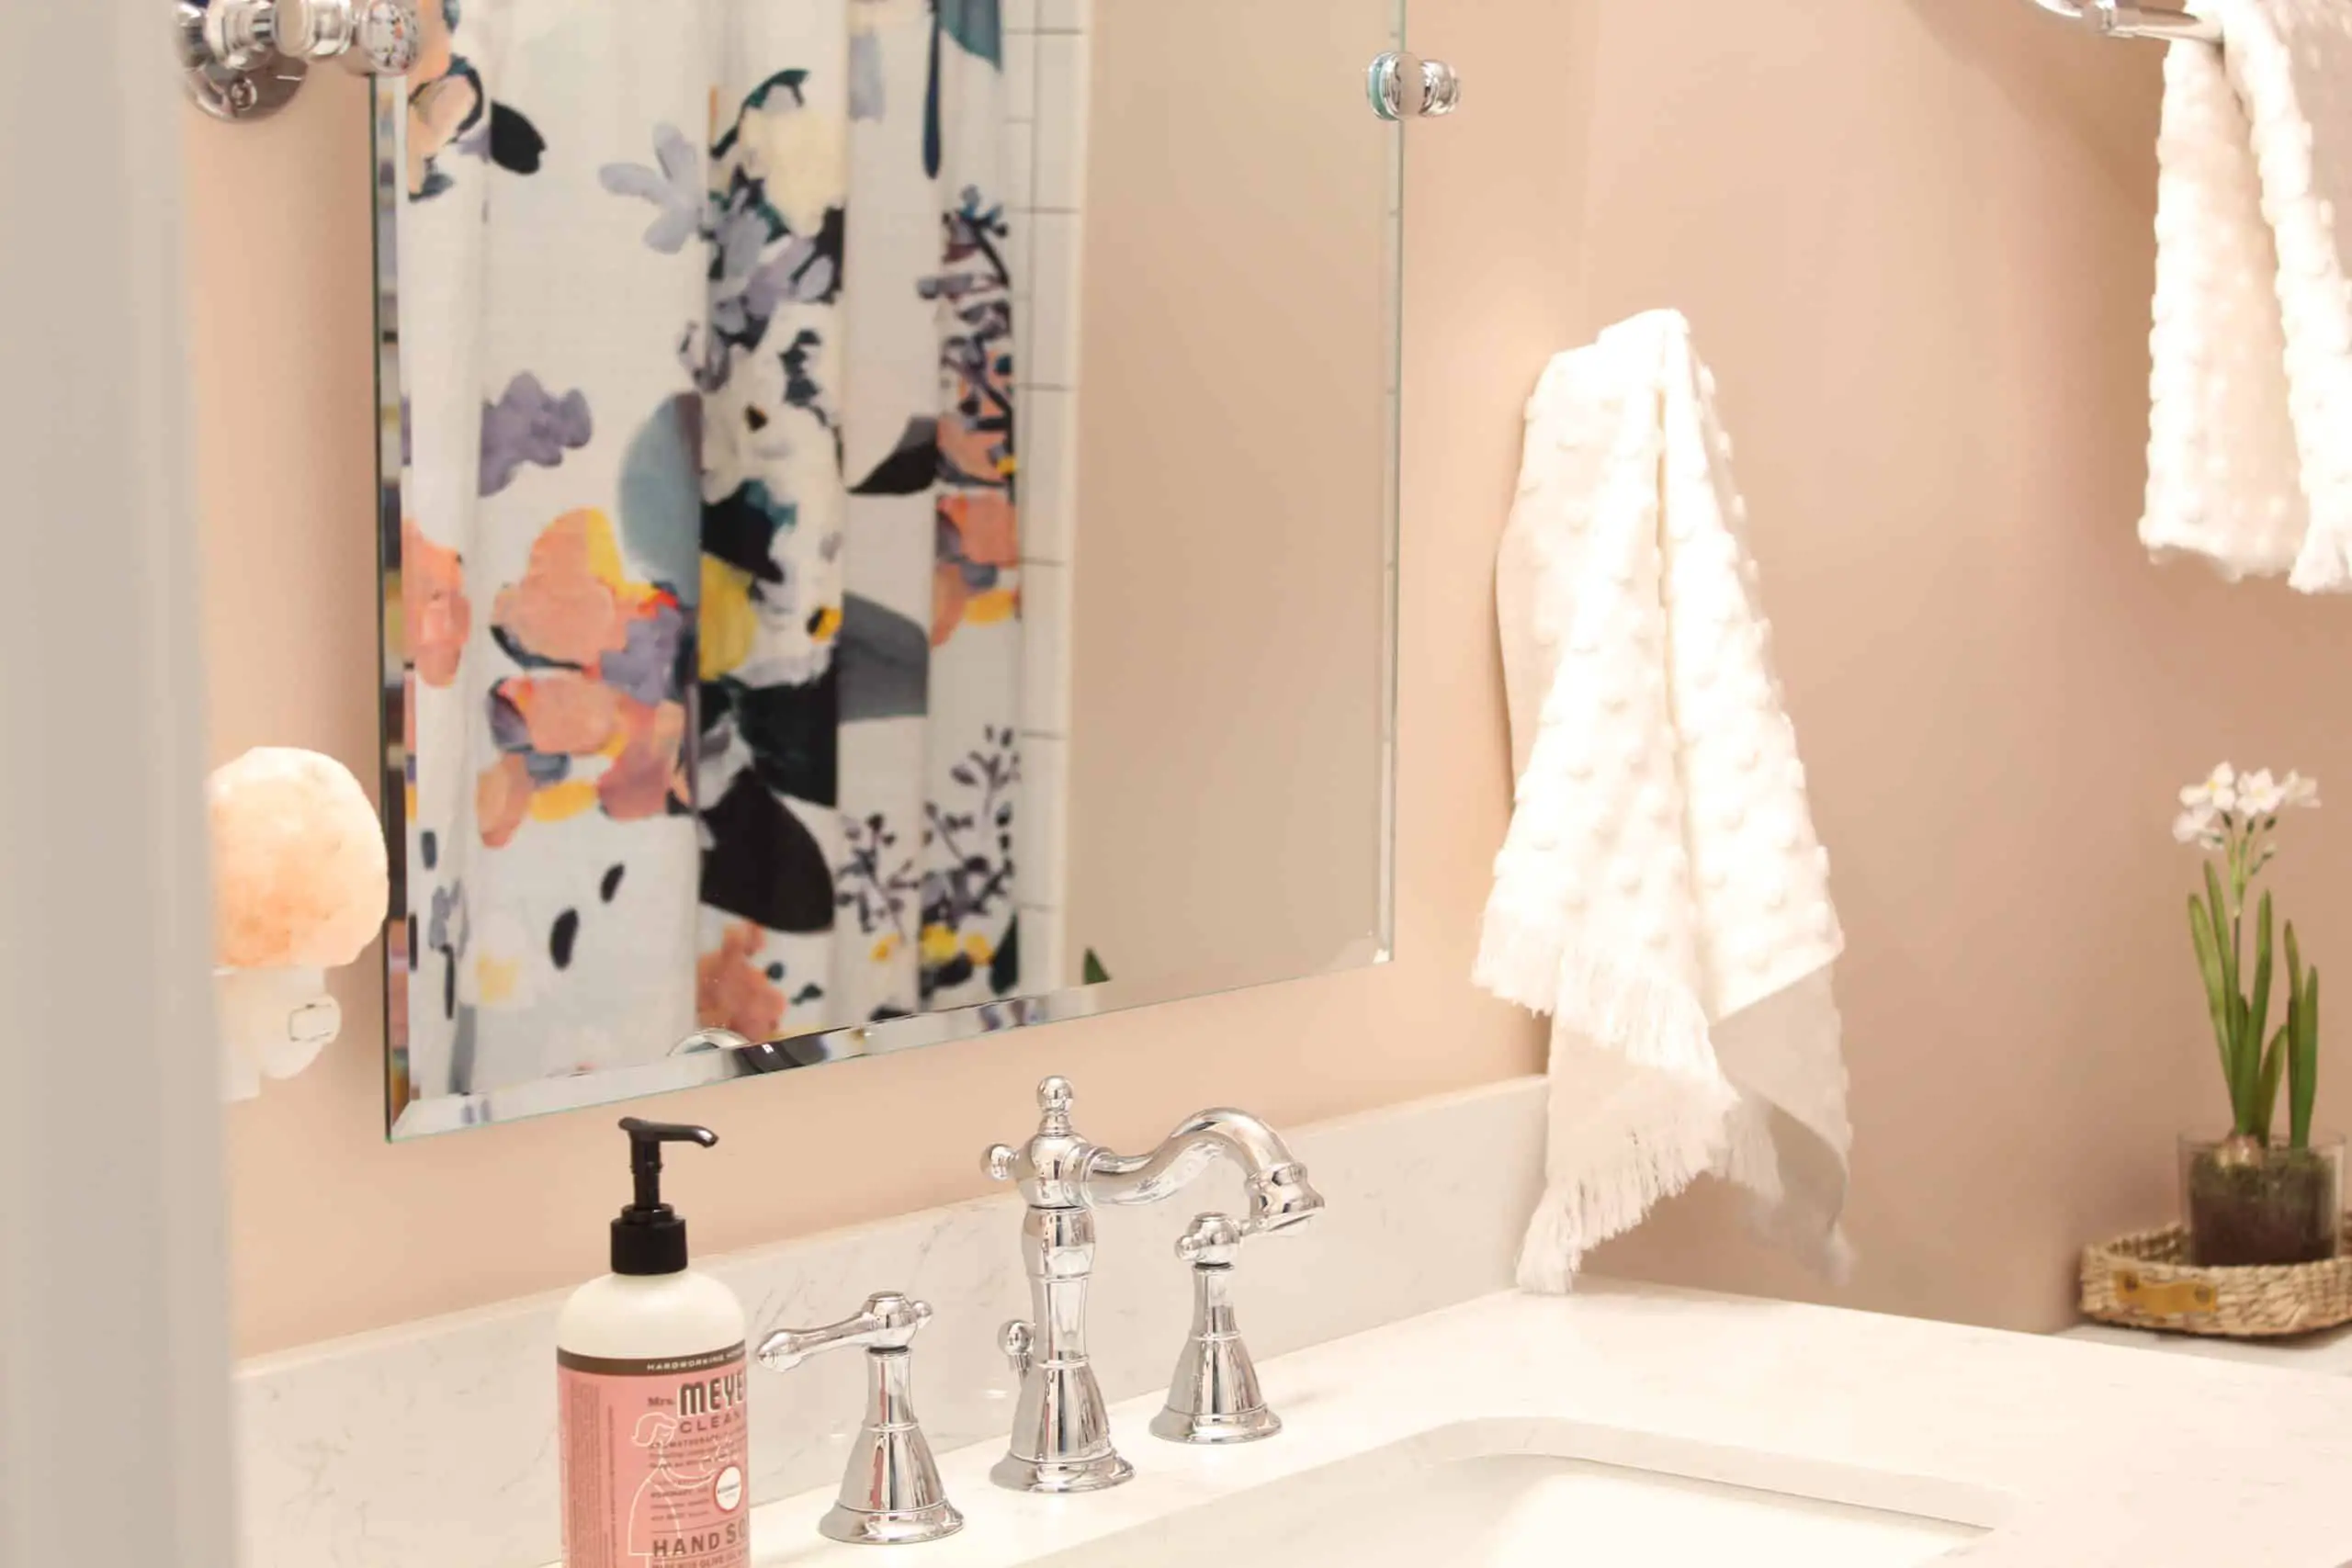 anthropologie botanica shower curtain, bathroom with pink walls, white polka dot towels, white subway tile shower surround, bathroom with hotel towel rack